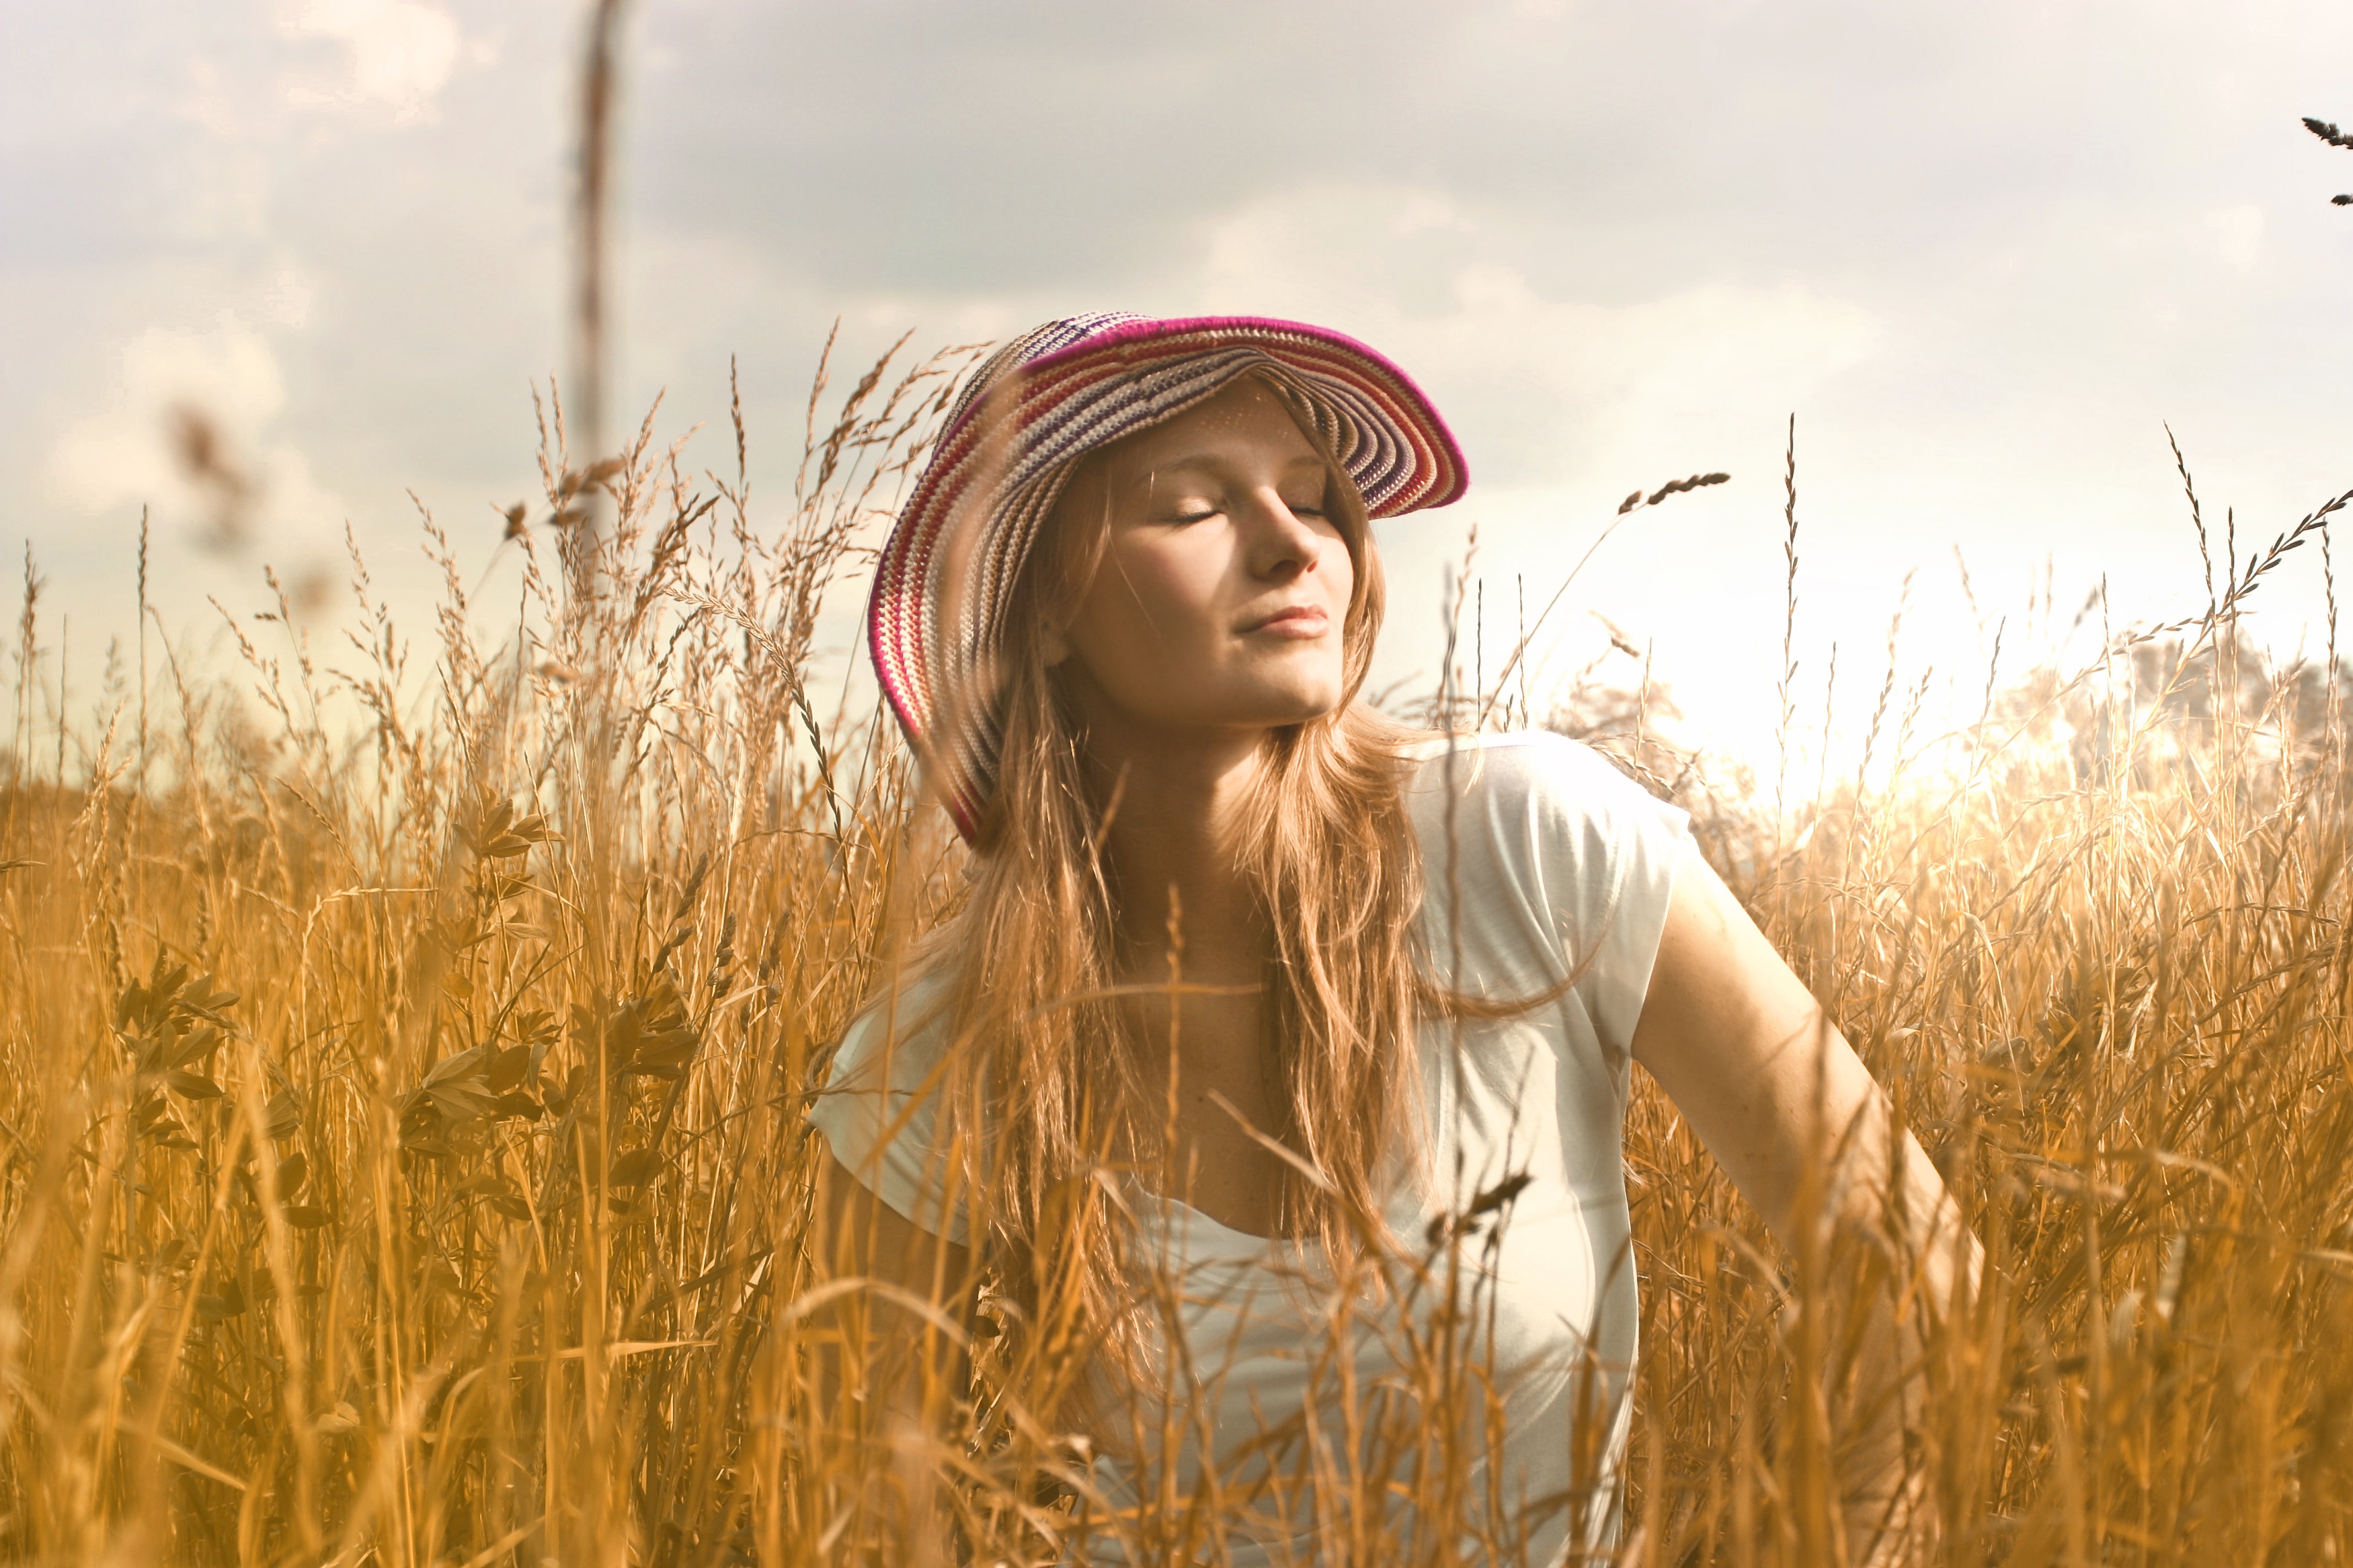 Woman wearing white top and red and white sunny hat photo